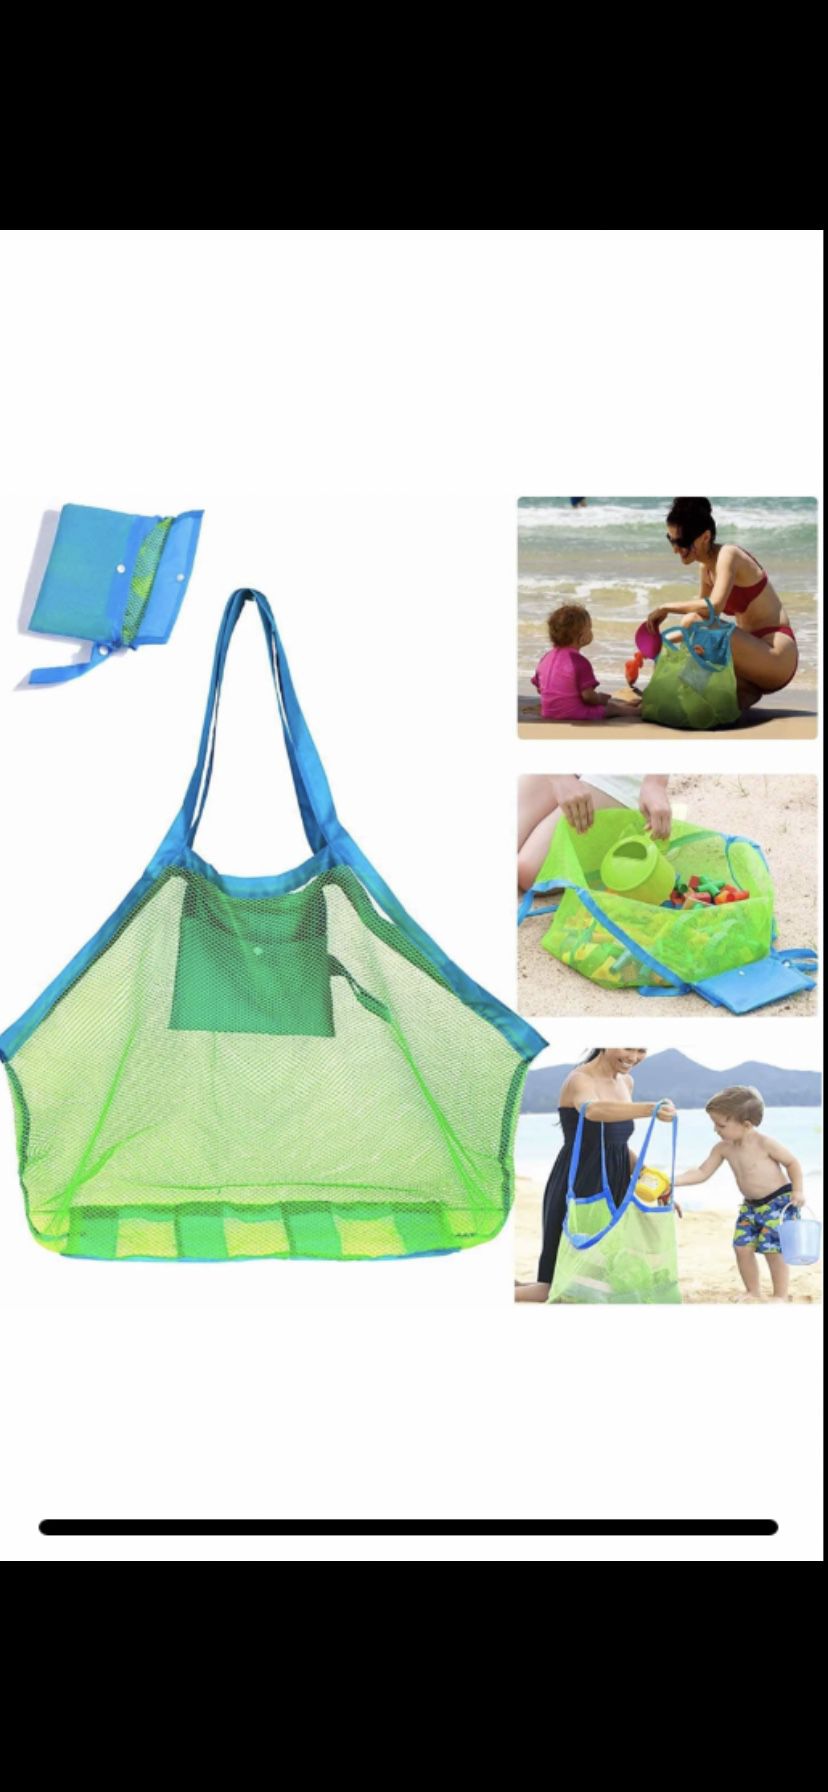 Mesh Extra Large Beach Bags and Backpack, Towels Sand Away For Holding Toys Children' Market Grocery Picnic Tote